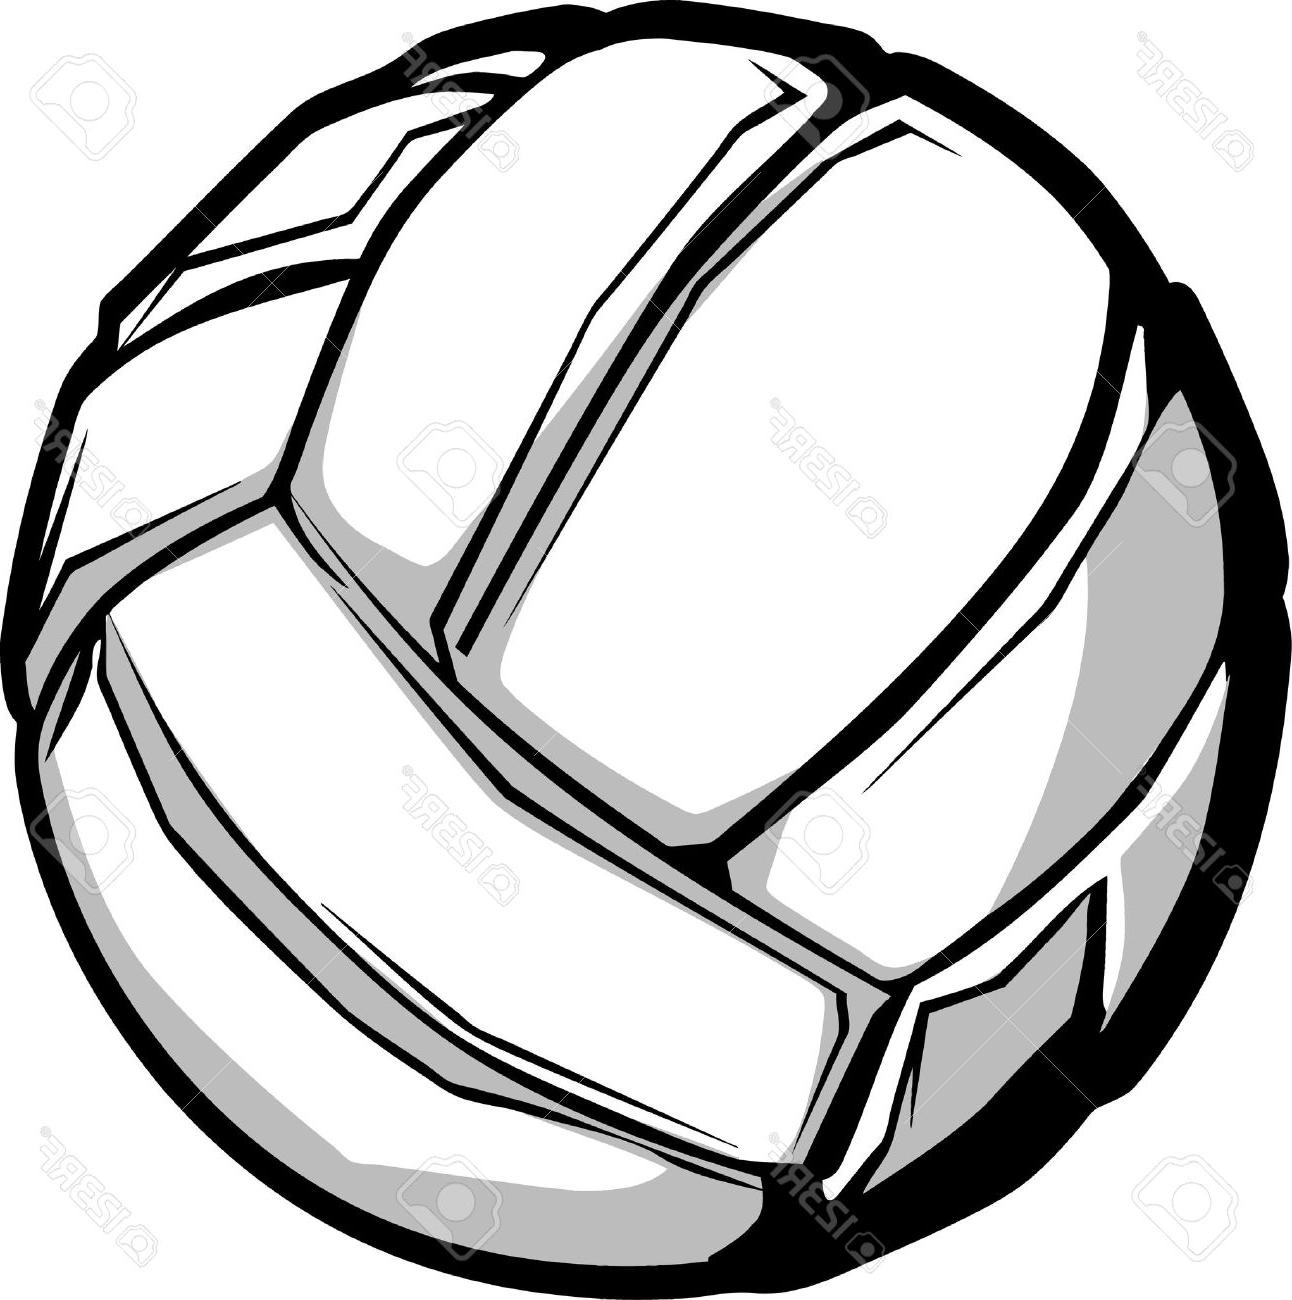 Download Clipart vector free volleyball pictures on Cliparts Pub ...